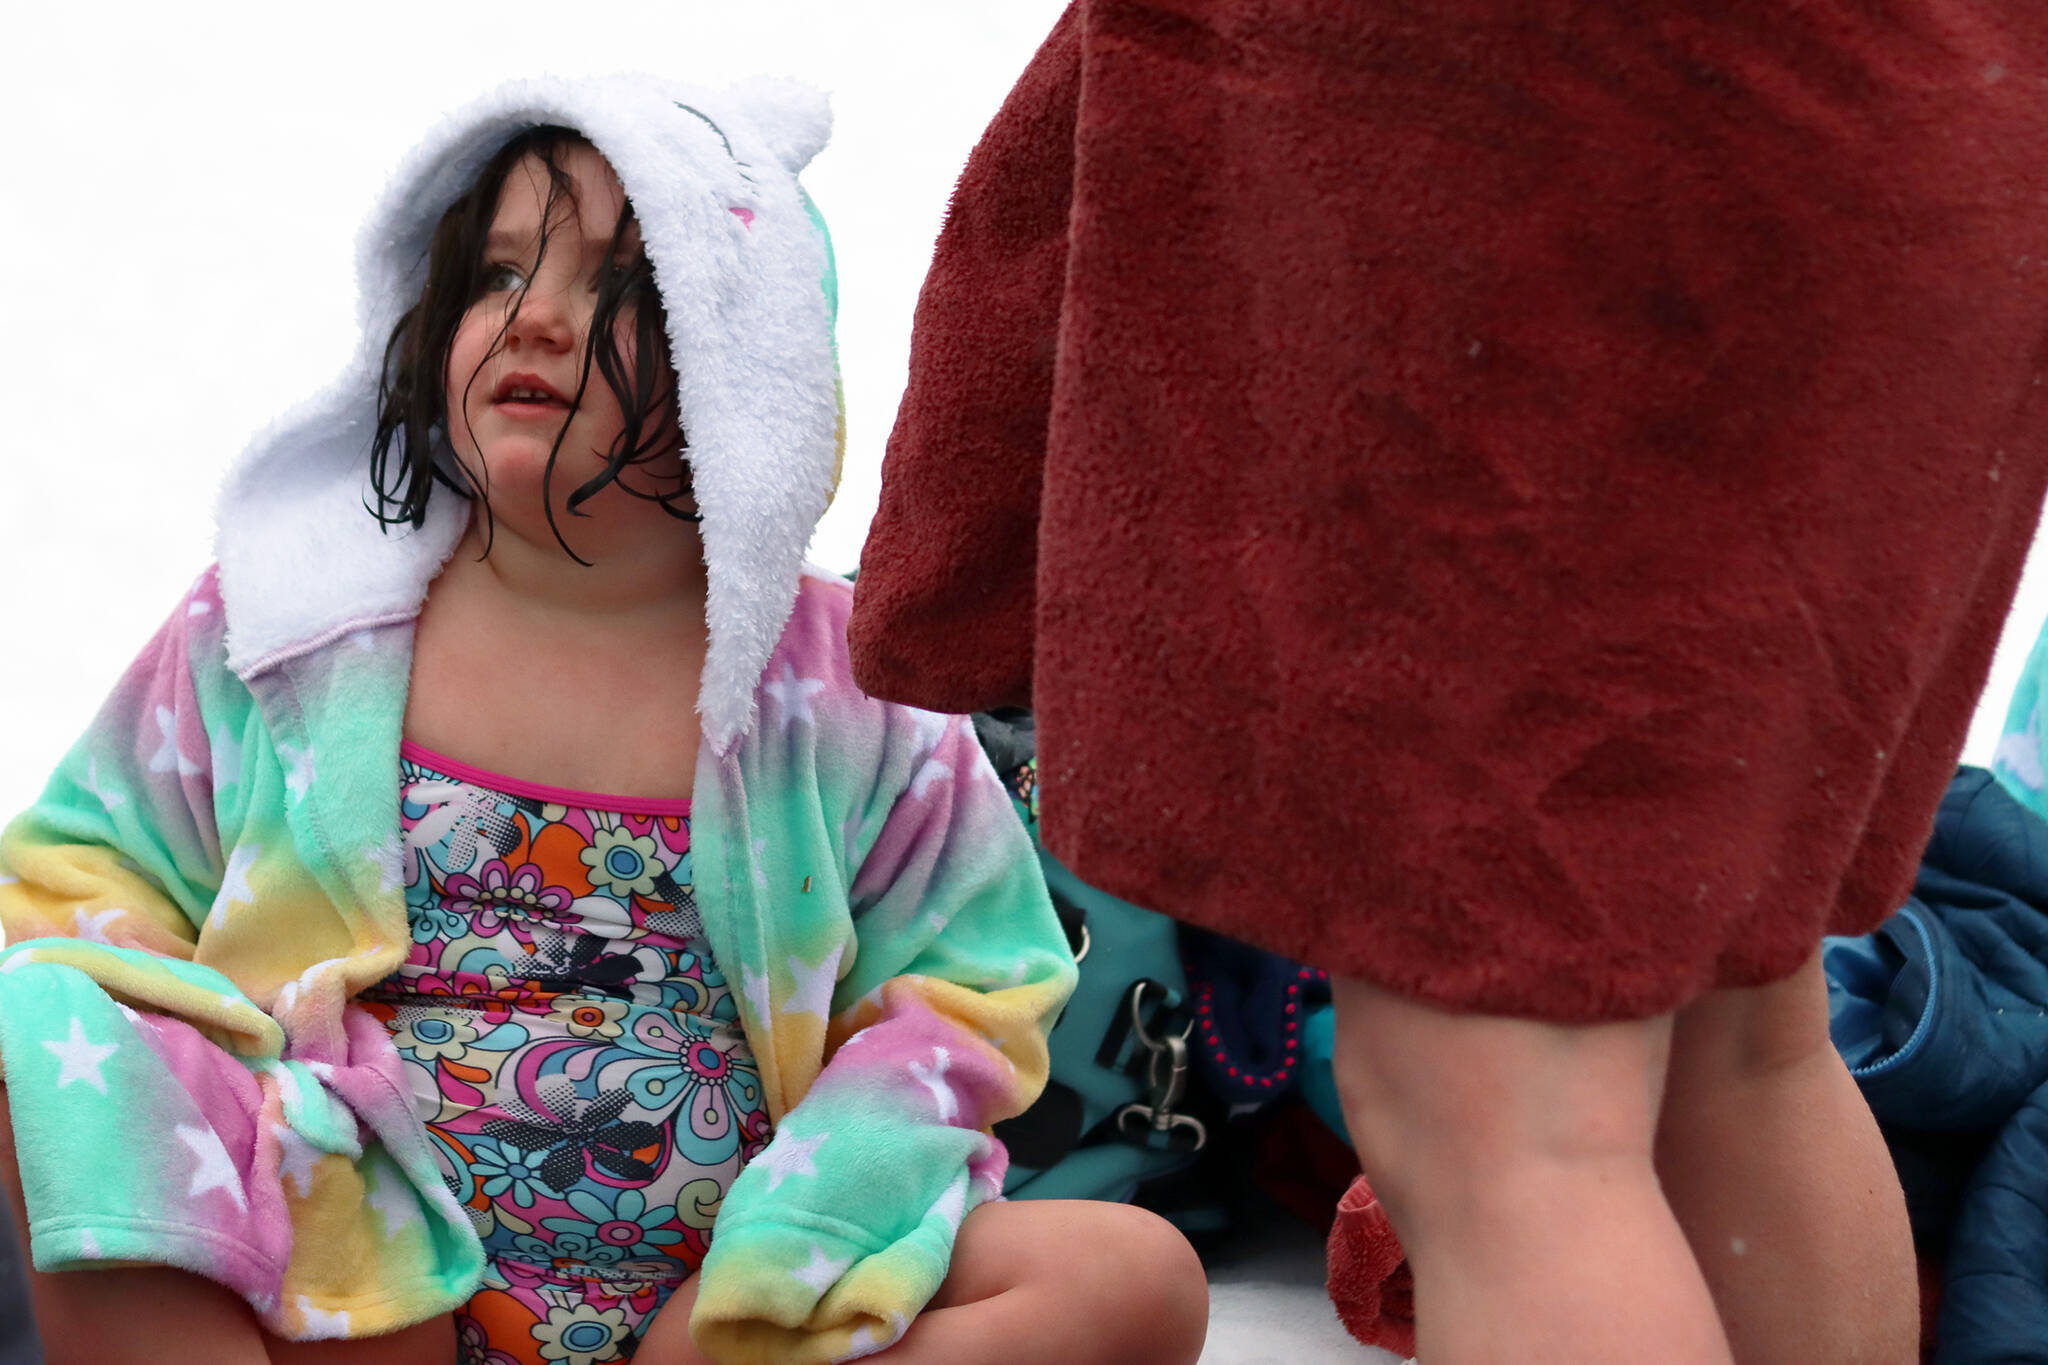 Juniper Harris, 6, dries off following the Polar Dip on Saturday. It was Harris’ first time taking the dip. The event is a long-running Juneau tradition. “She really wanted to after last year,” said Stephenie Harris, Juniper’s mom. She said Juniper skipped skiing to be there. (Ben Hohenstatt / Juneau Empire)